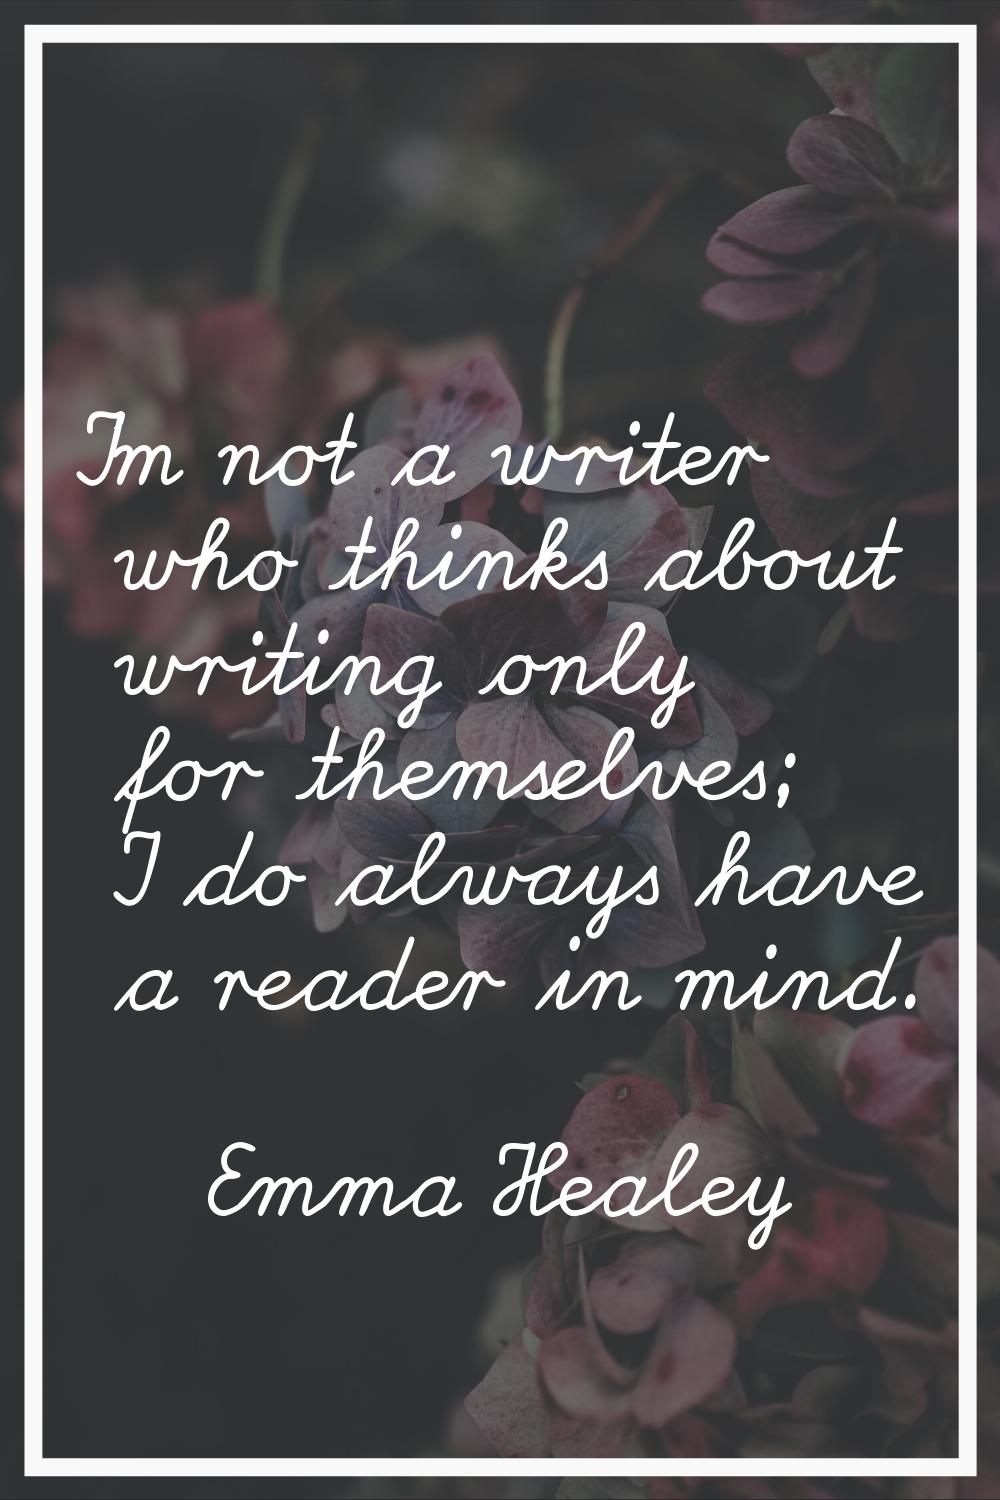 I'm not a writer who thinks about writing only for themselves; I do always have a reader in mind.